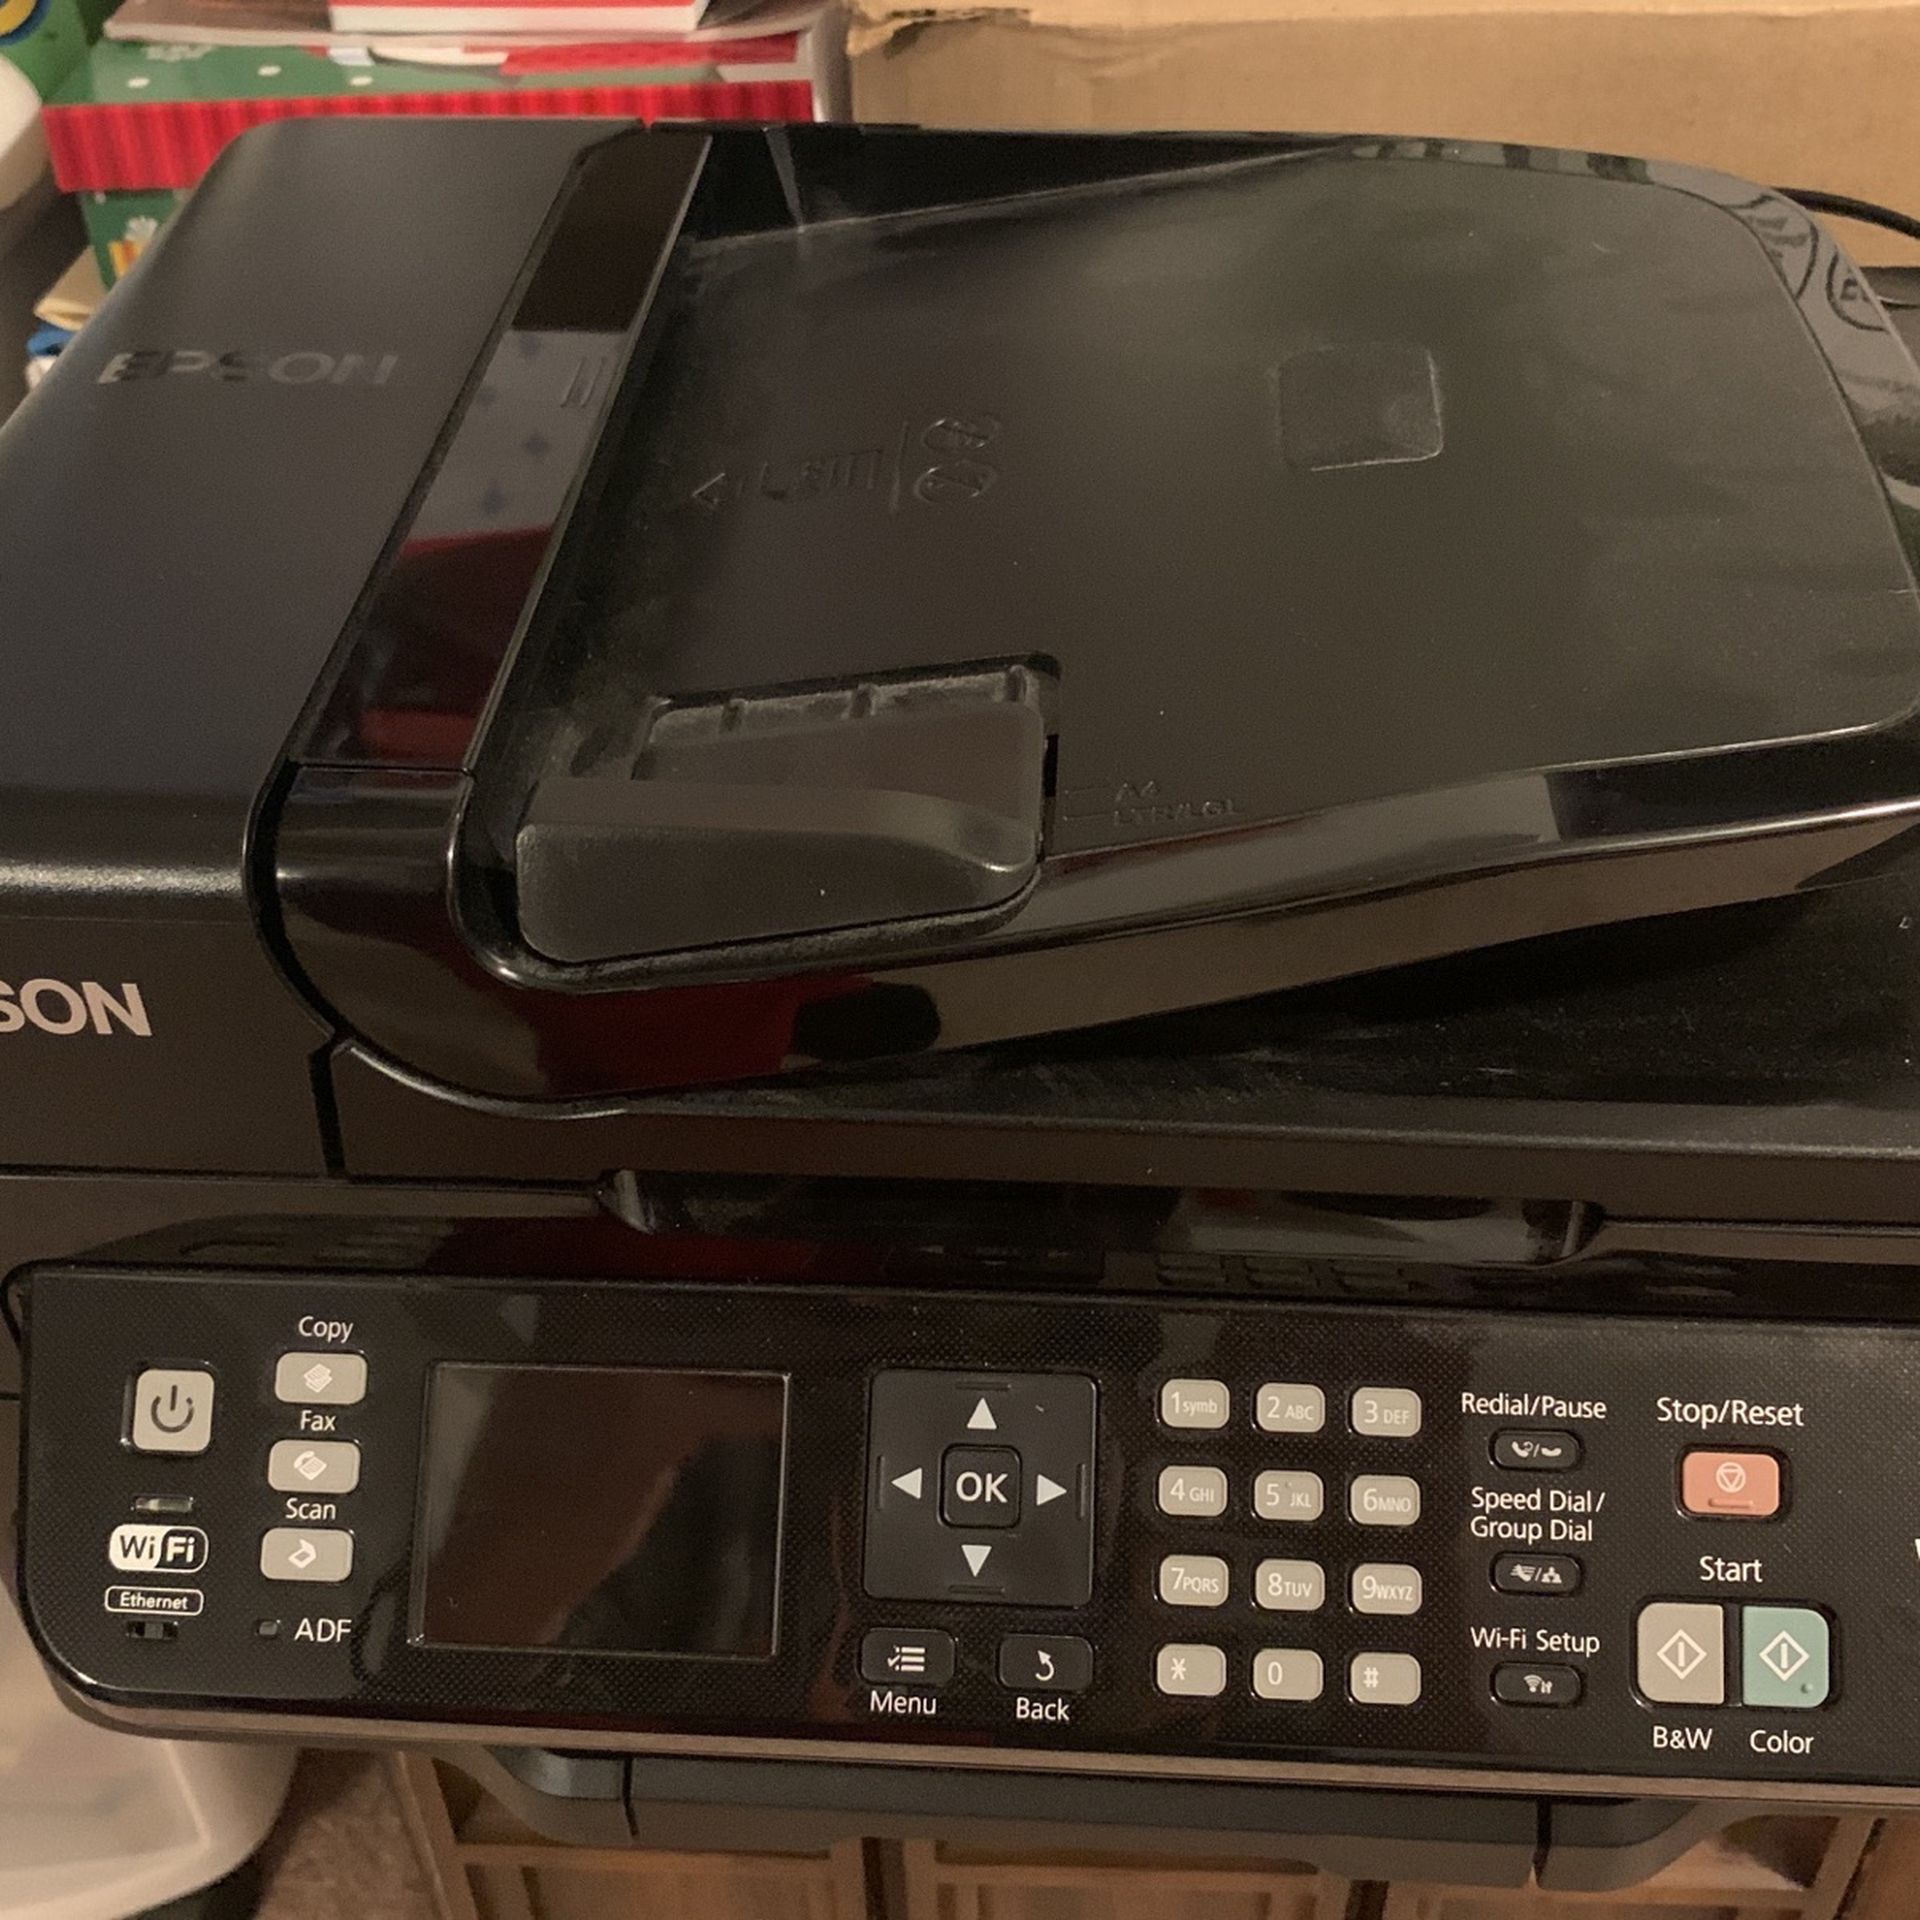 Epson WF-2540 color printer/copy/scan machine gently used